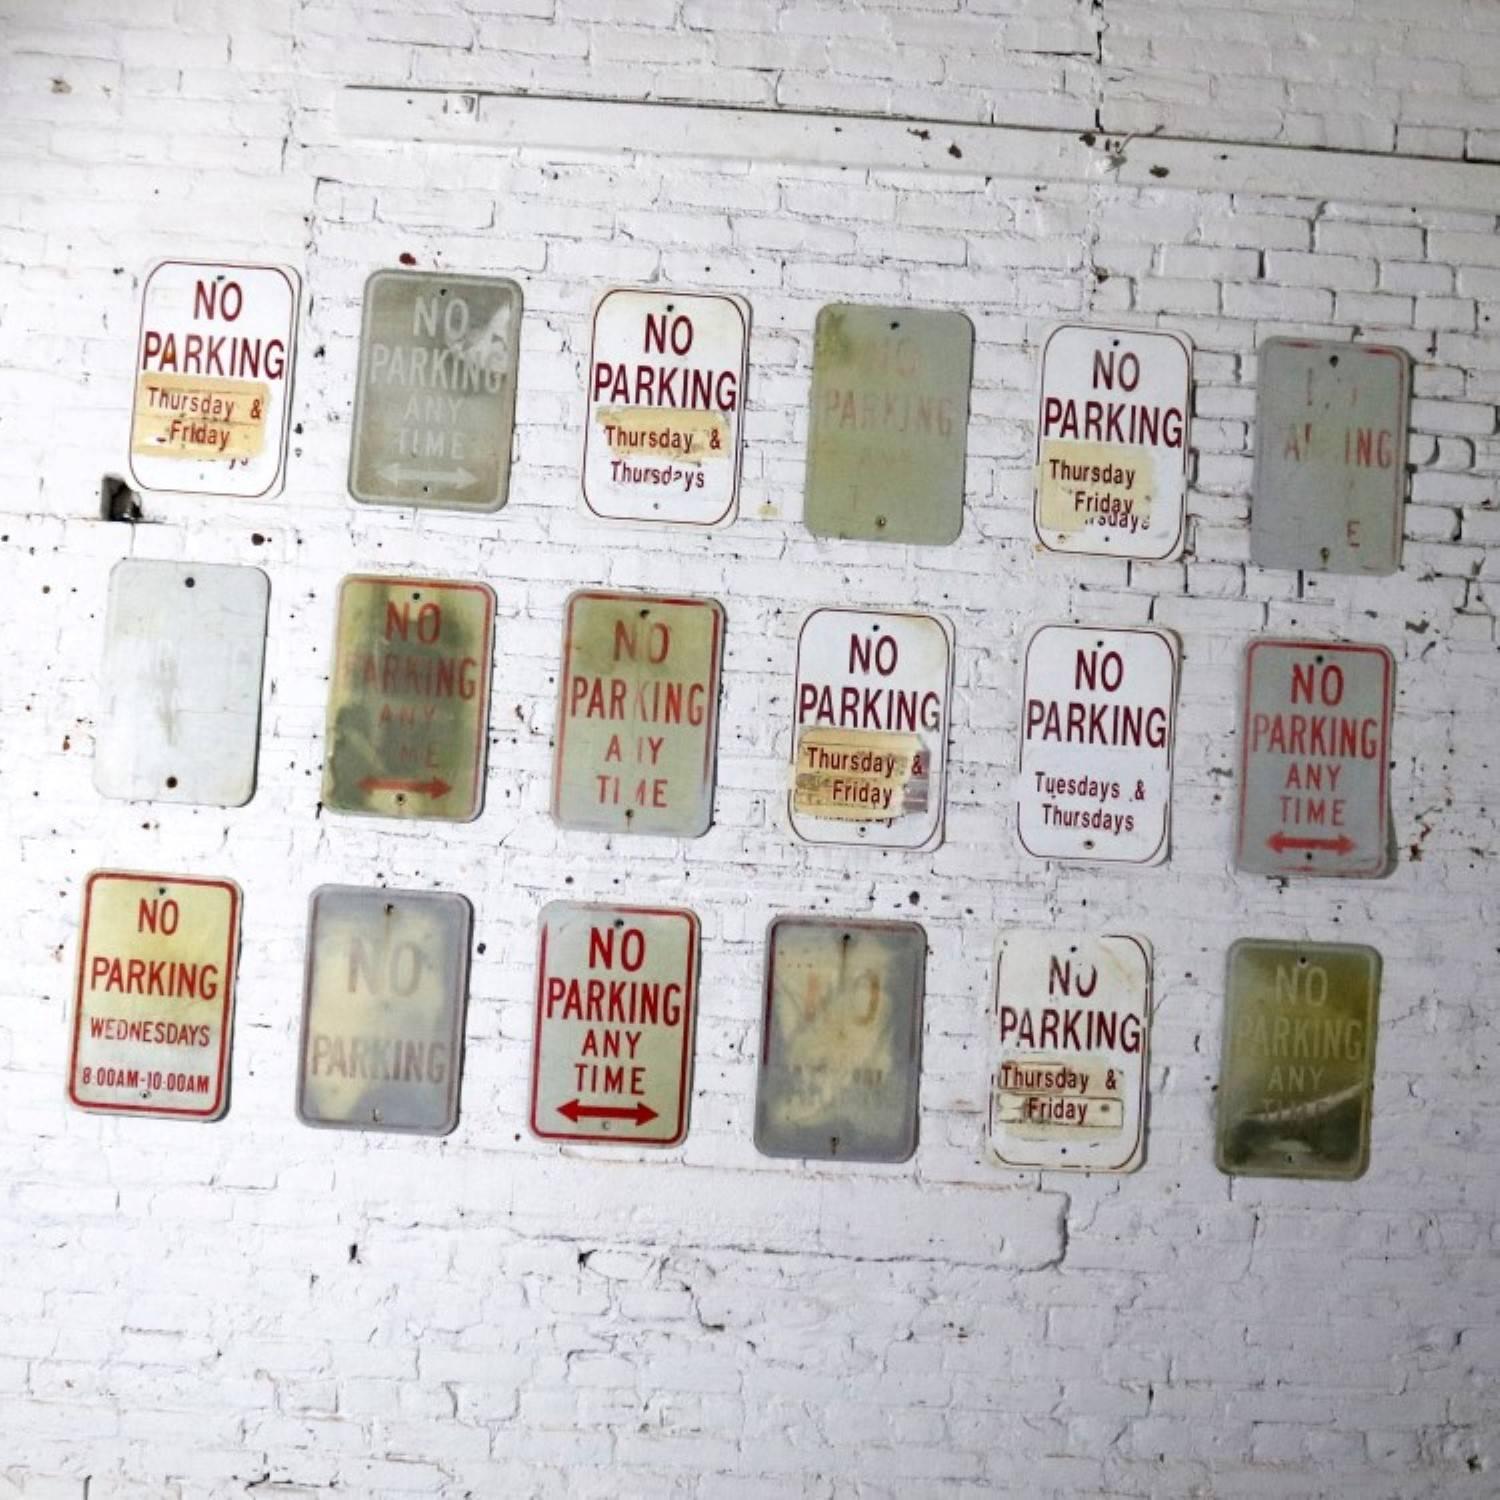 We are offering 18 vintage metal no parking signs in varying degrees of condition and patina. In the photos some signs look like there is no printing on them. It is there but very faded. We would not suggest these as a single purchase, but they do